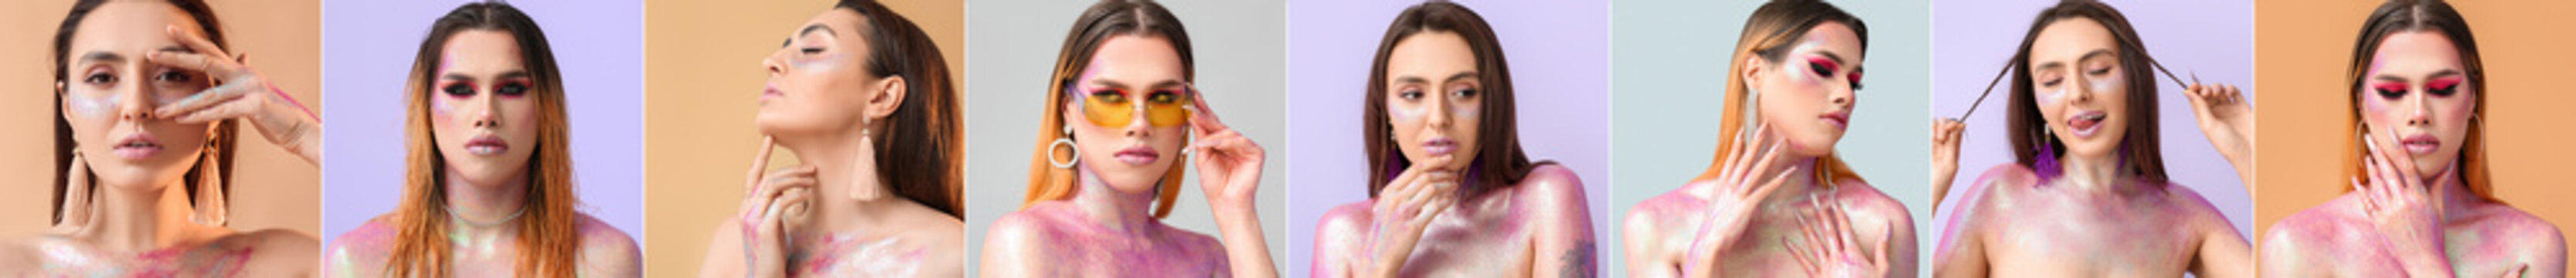 Set of fashionable transgender woman and young girl with glitters on body against colorful background